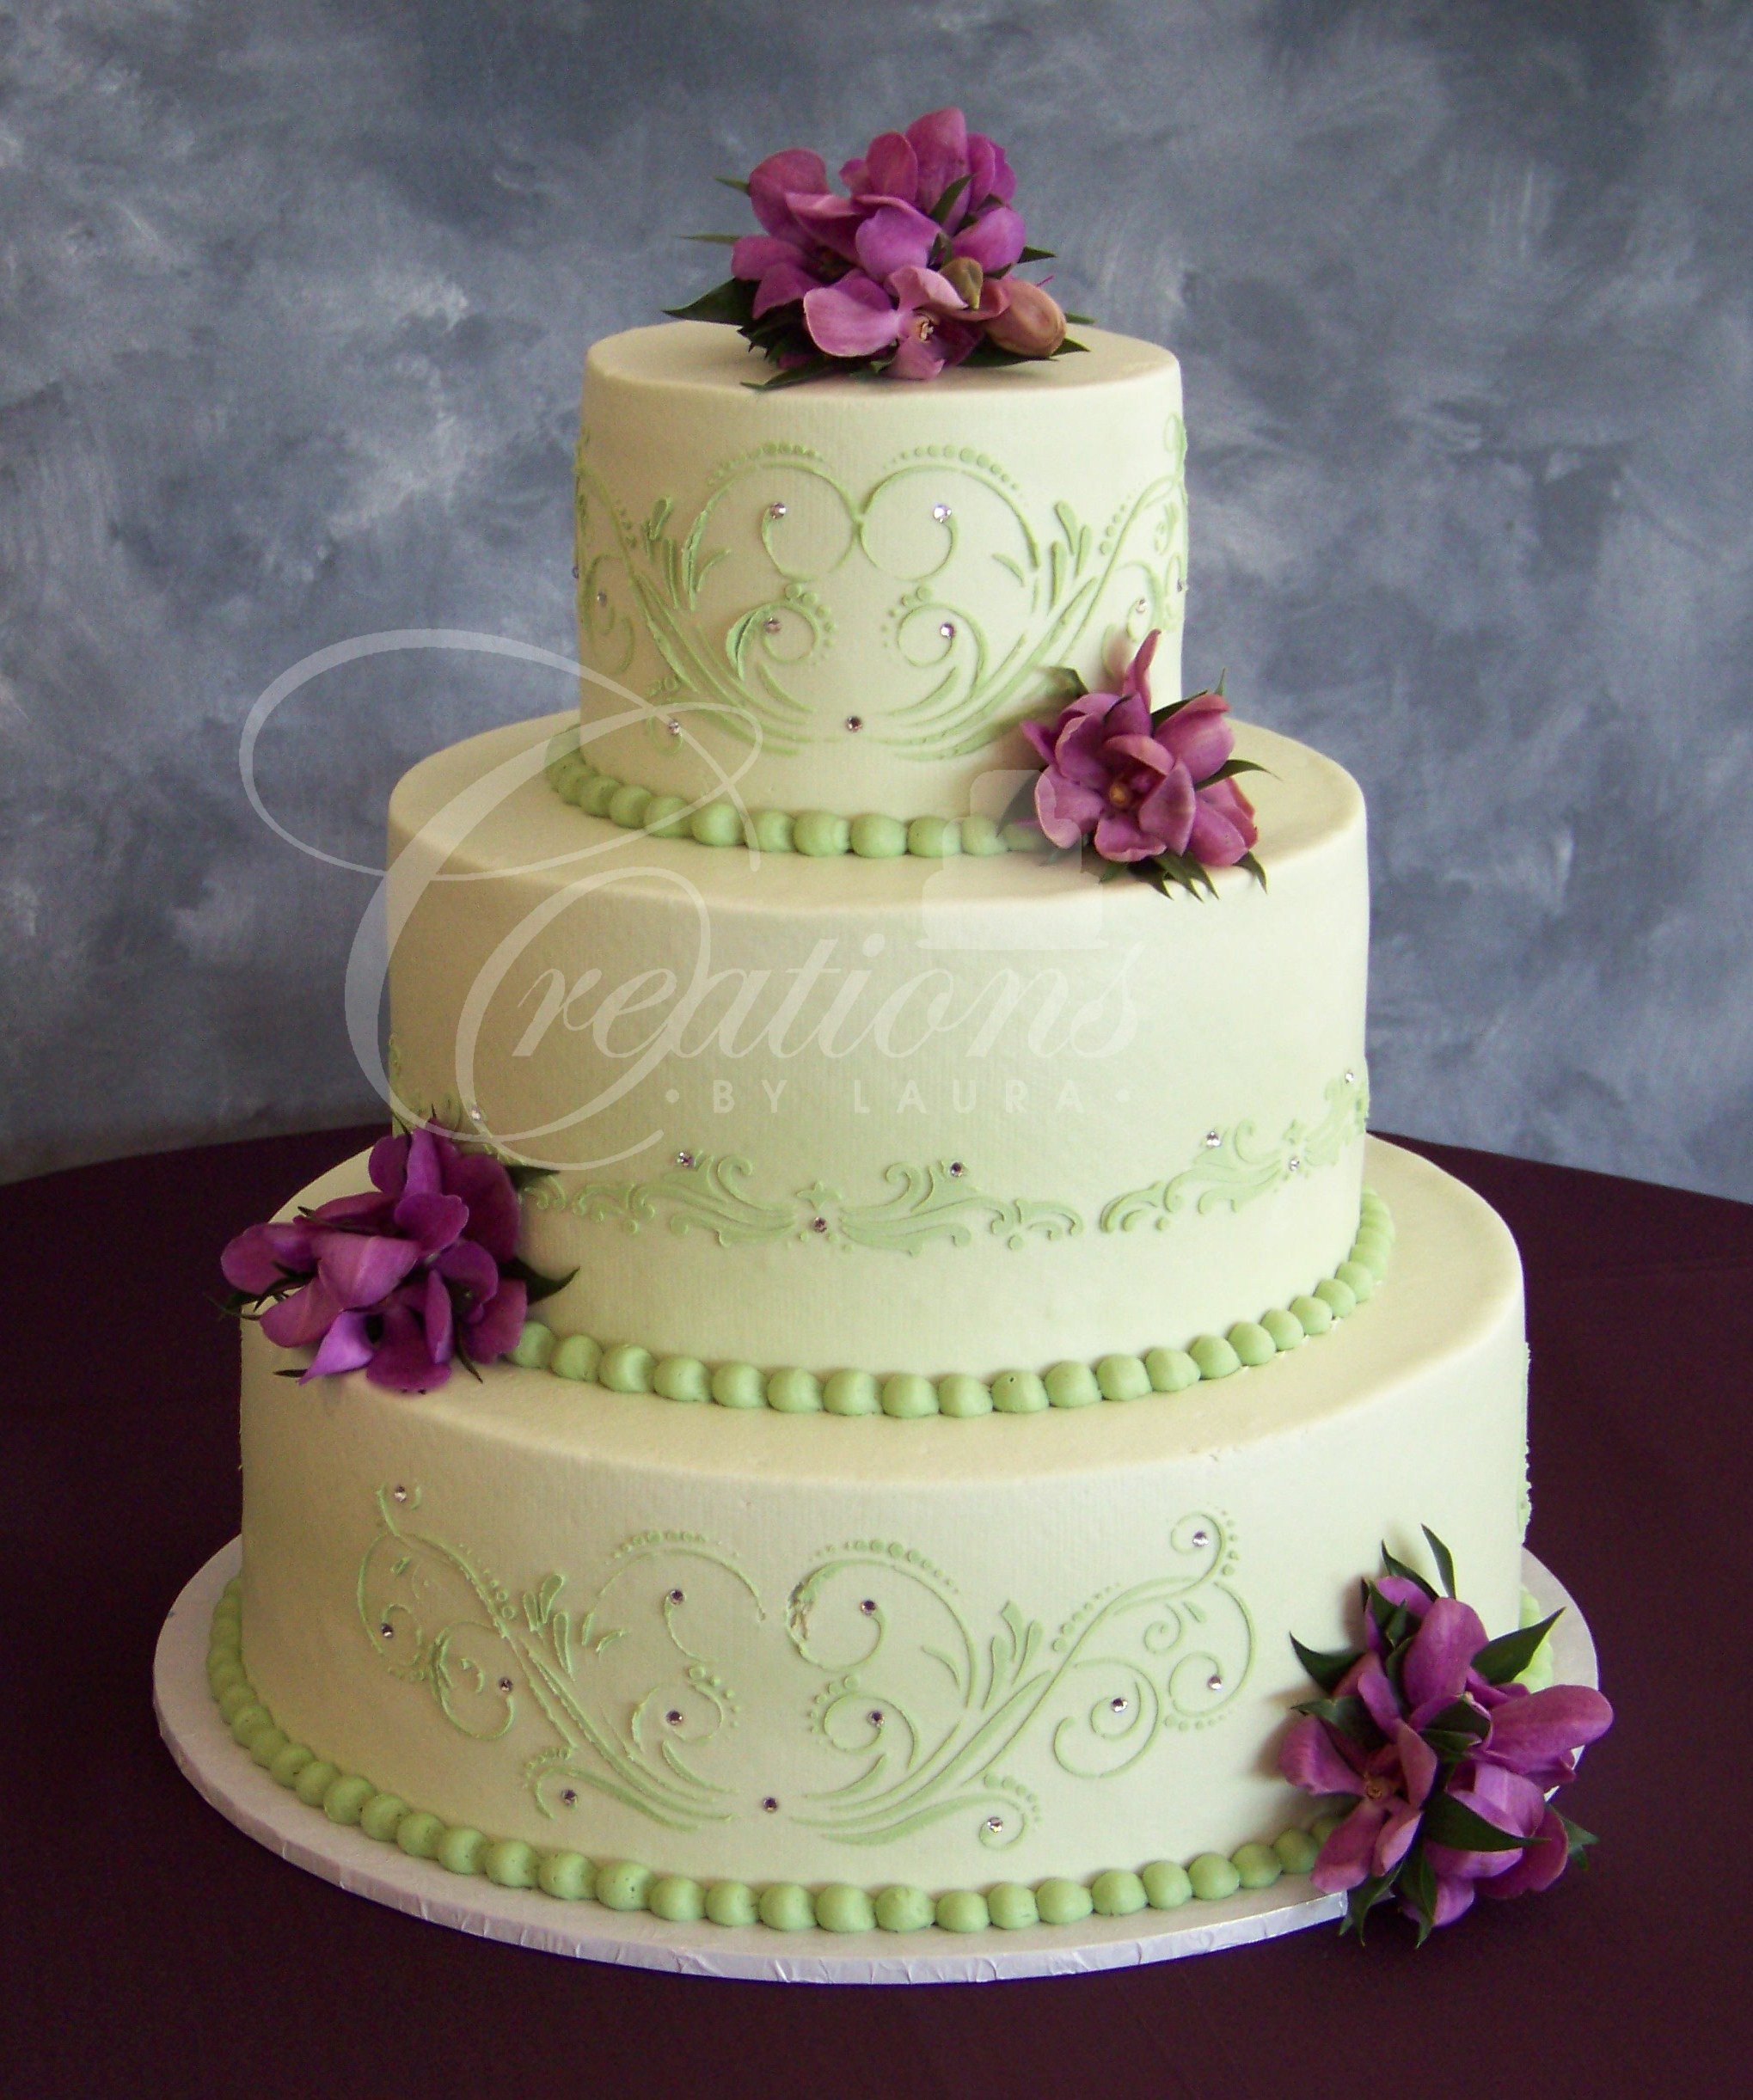 Wedding Cakes Stencils
 Creations by Laura